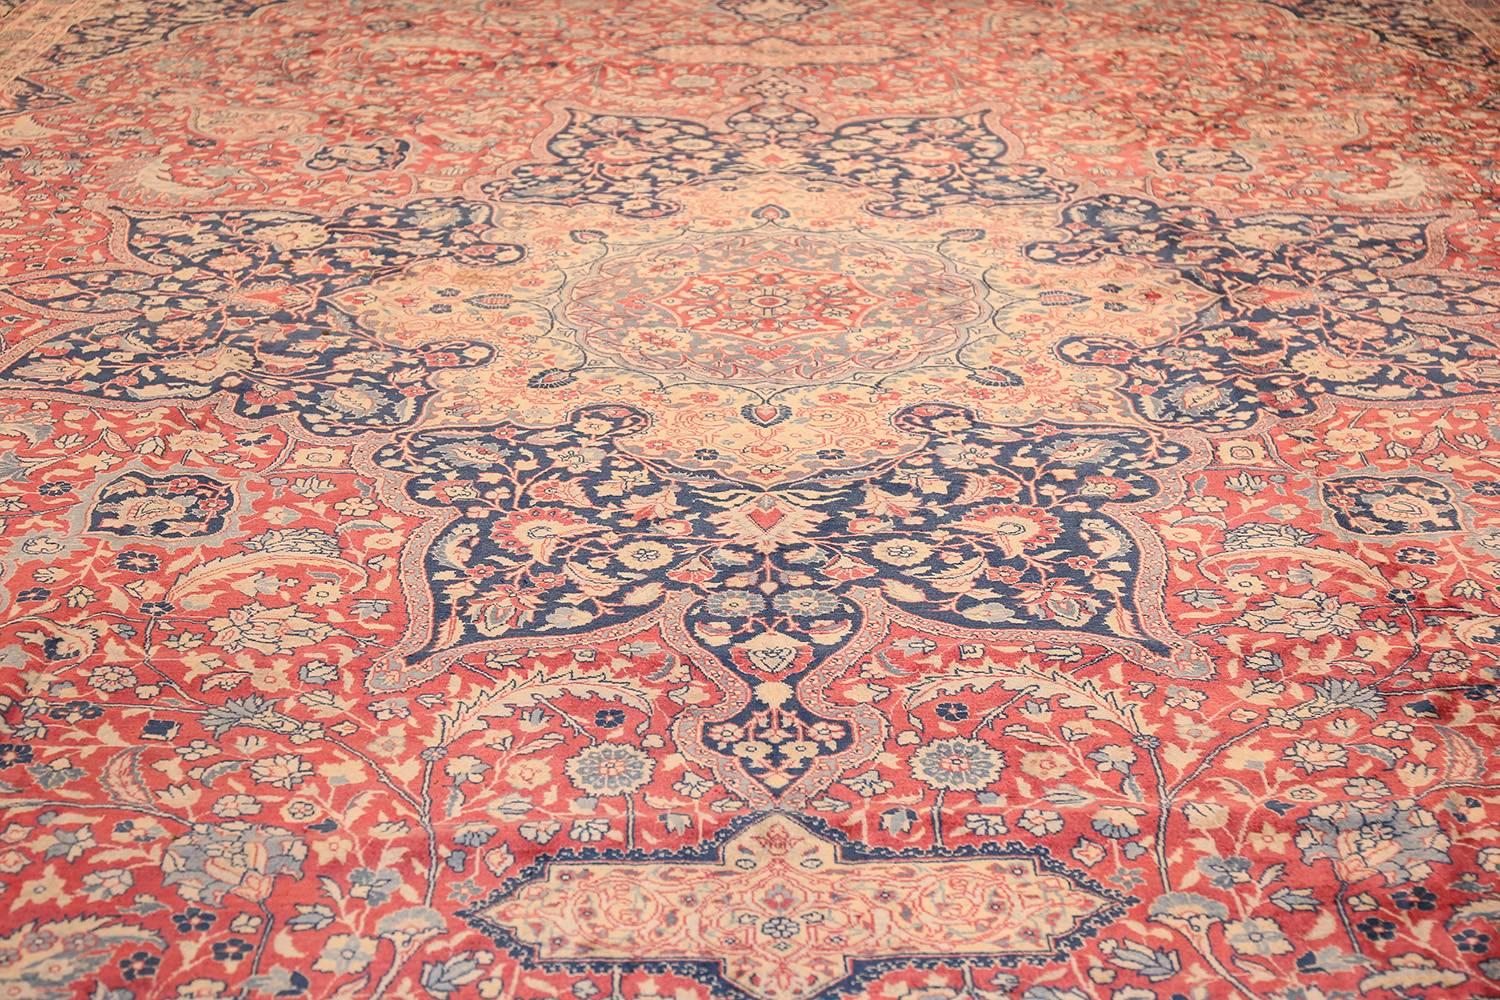 Antique Persian Tabriz Carpet. Size: 14 ft 10 in x 21 ft 5 in (4.52 m x 6.53 m) 1